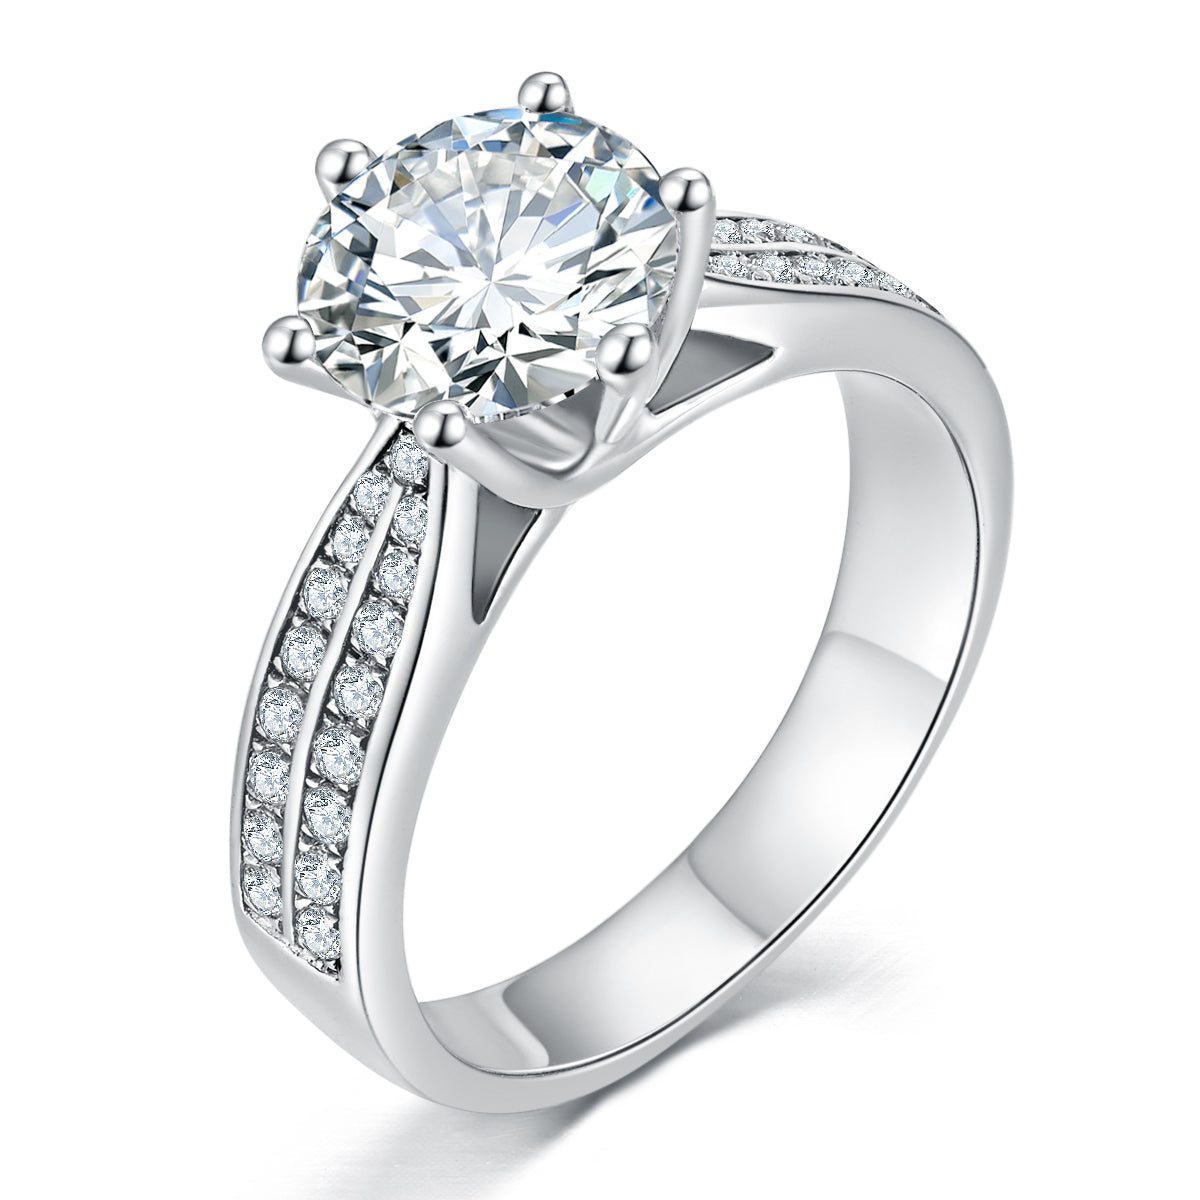 S925 Silver Moissanite Diamond Clad Ring with Zircon Edge Queen of Stars RM1034